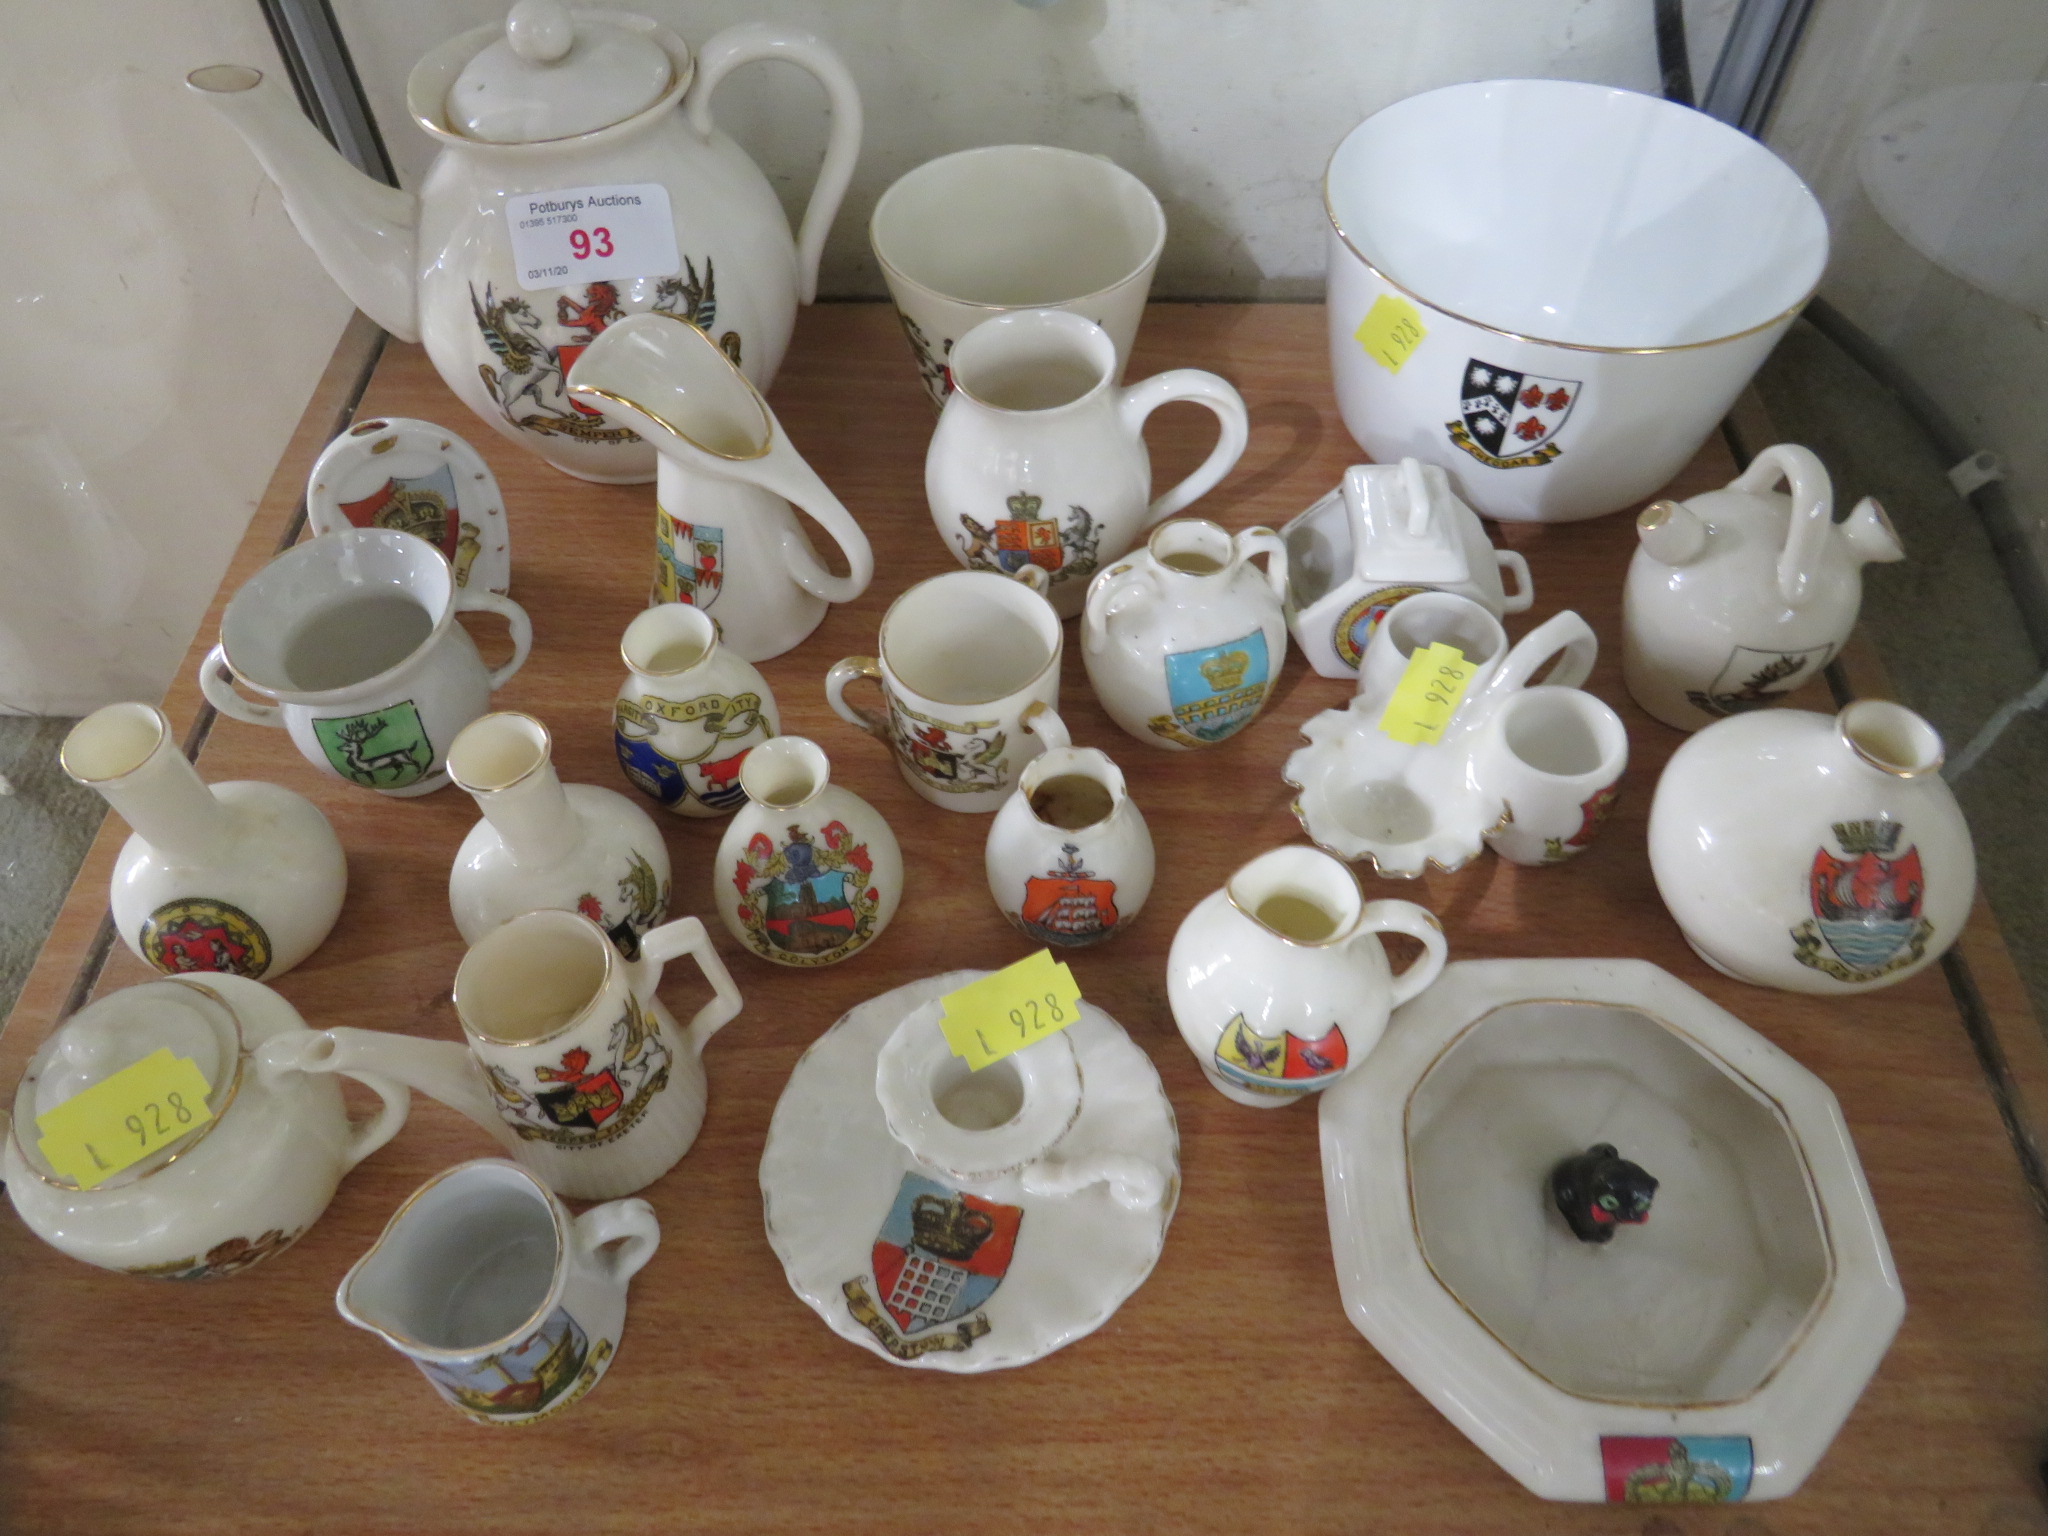 ONE SHELF OF MINIATURE CRESTED CHINA INCLUDING TEAPOT, VASES, ASH TRAY AND CHAMBER STICK